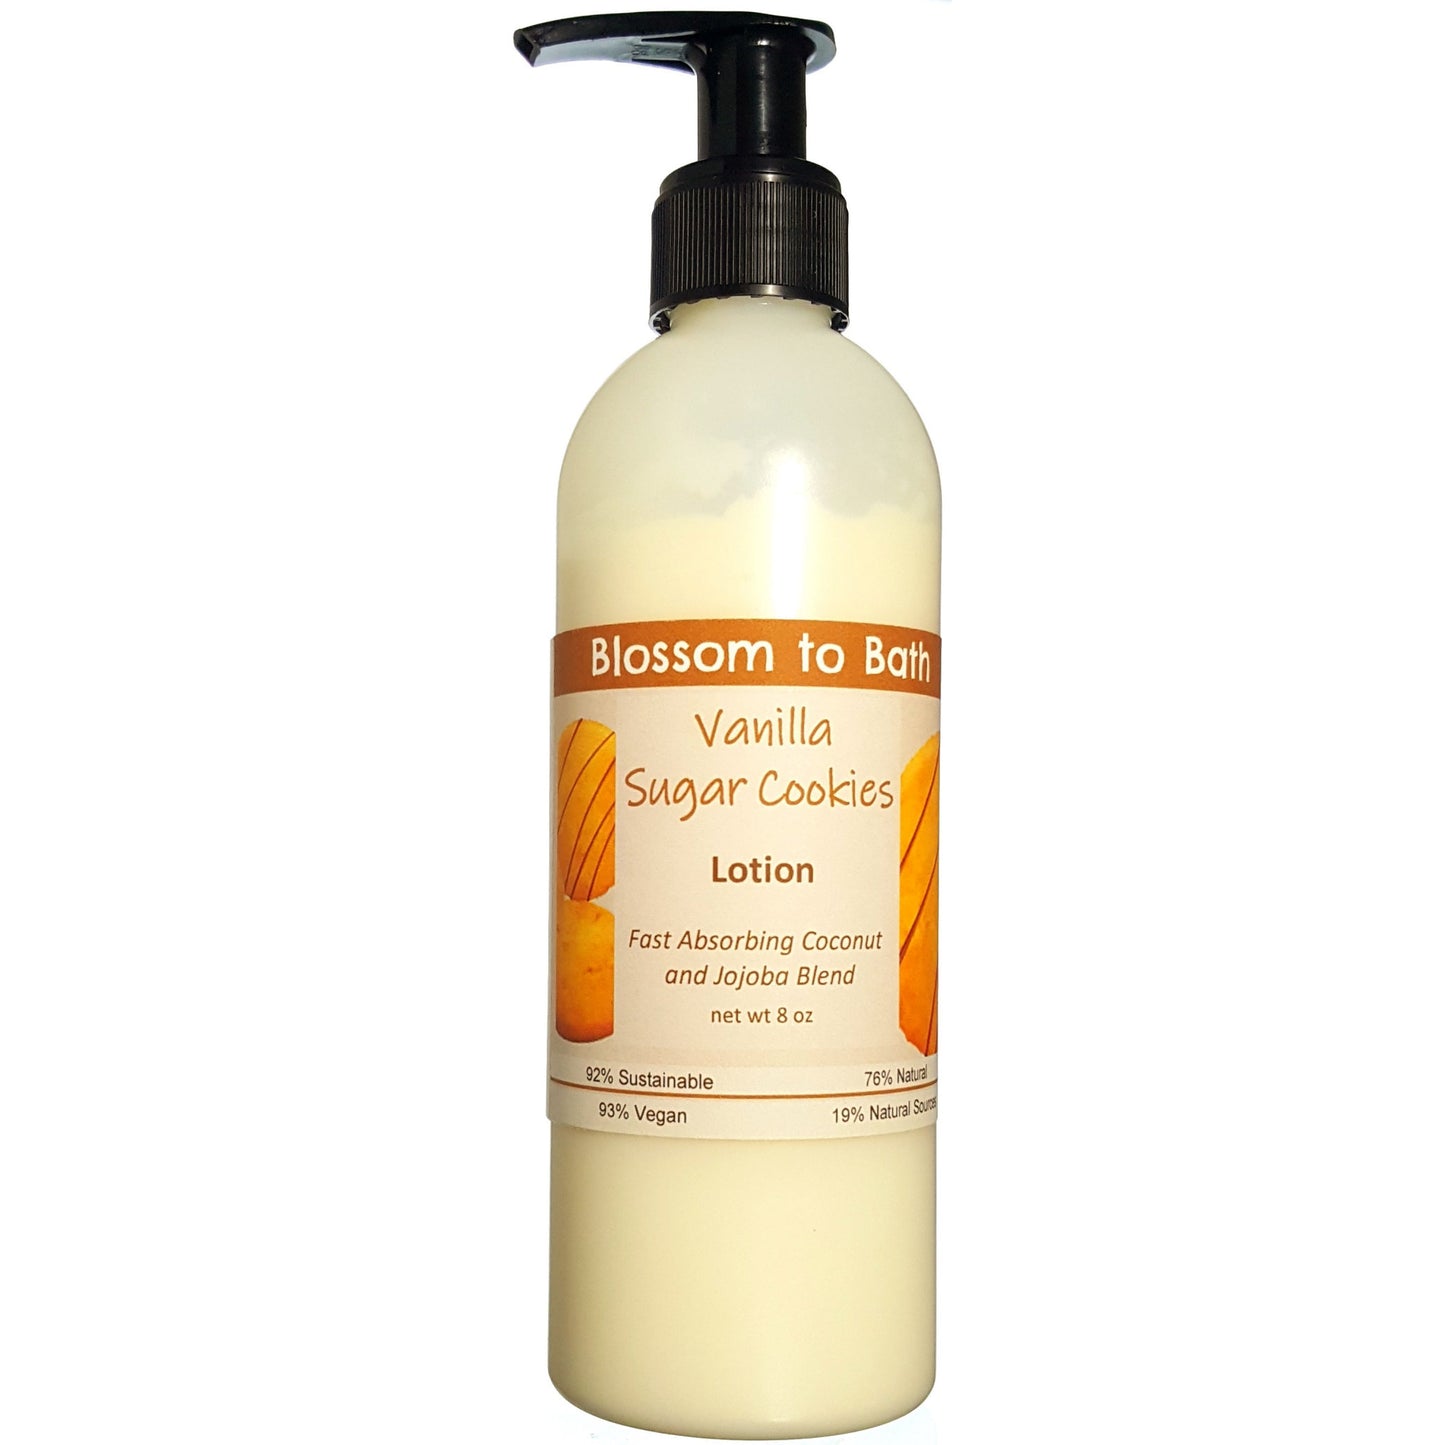 Buy Blossom to Bath Vanilla Sugar Cookies Lotion from Flowersong Soap Studio.  Daily moisture  that soaks in quickly made with organic oils and butters that soften and smooth the skin  Smells like sugar cookies in the oven.